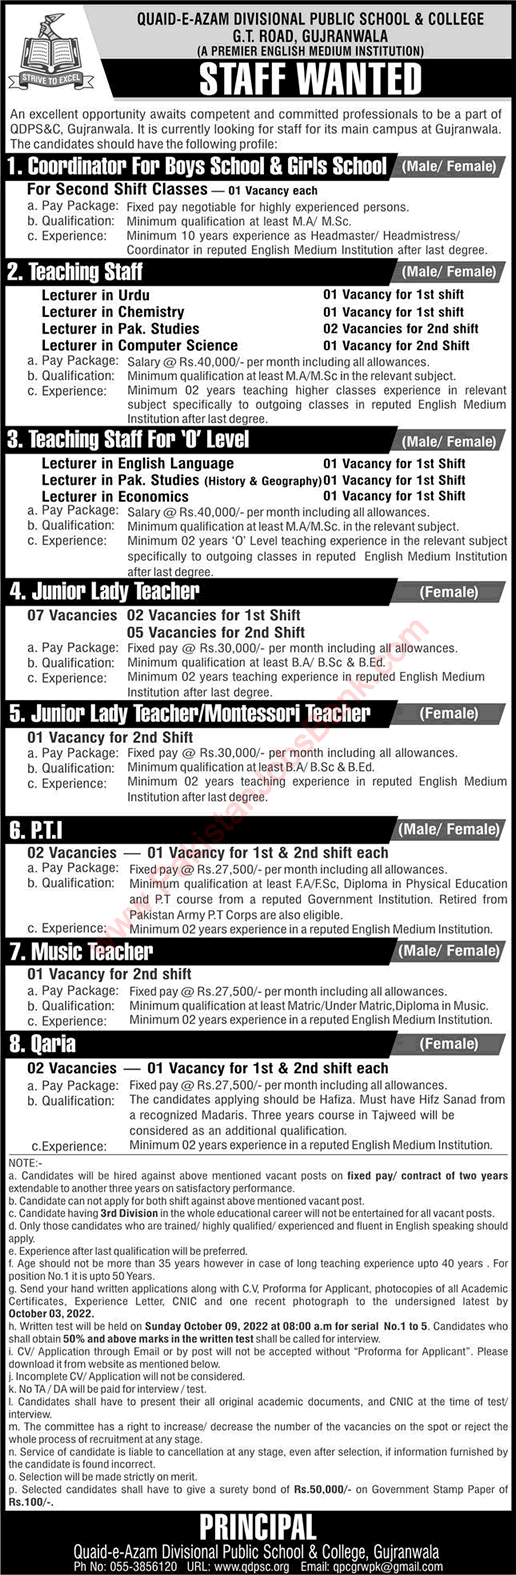 Quaid-e-Azam Divisional Public School and College Gujranwala Jobs September 2022 Lecturers & Others Latest